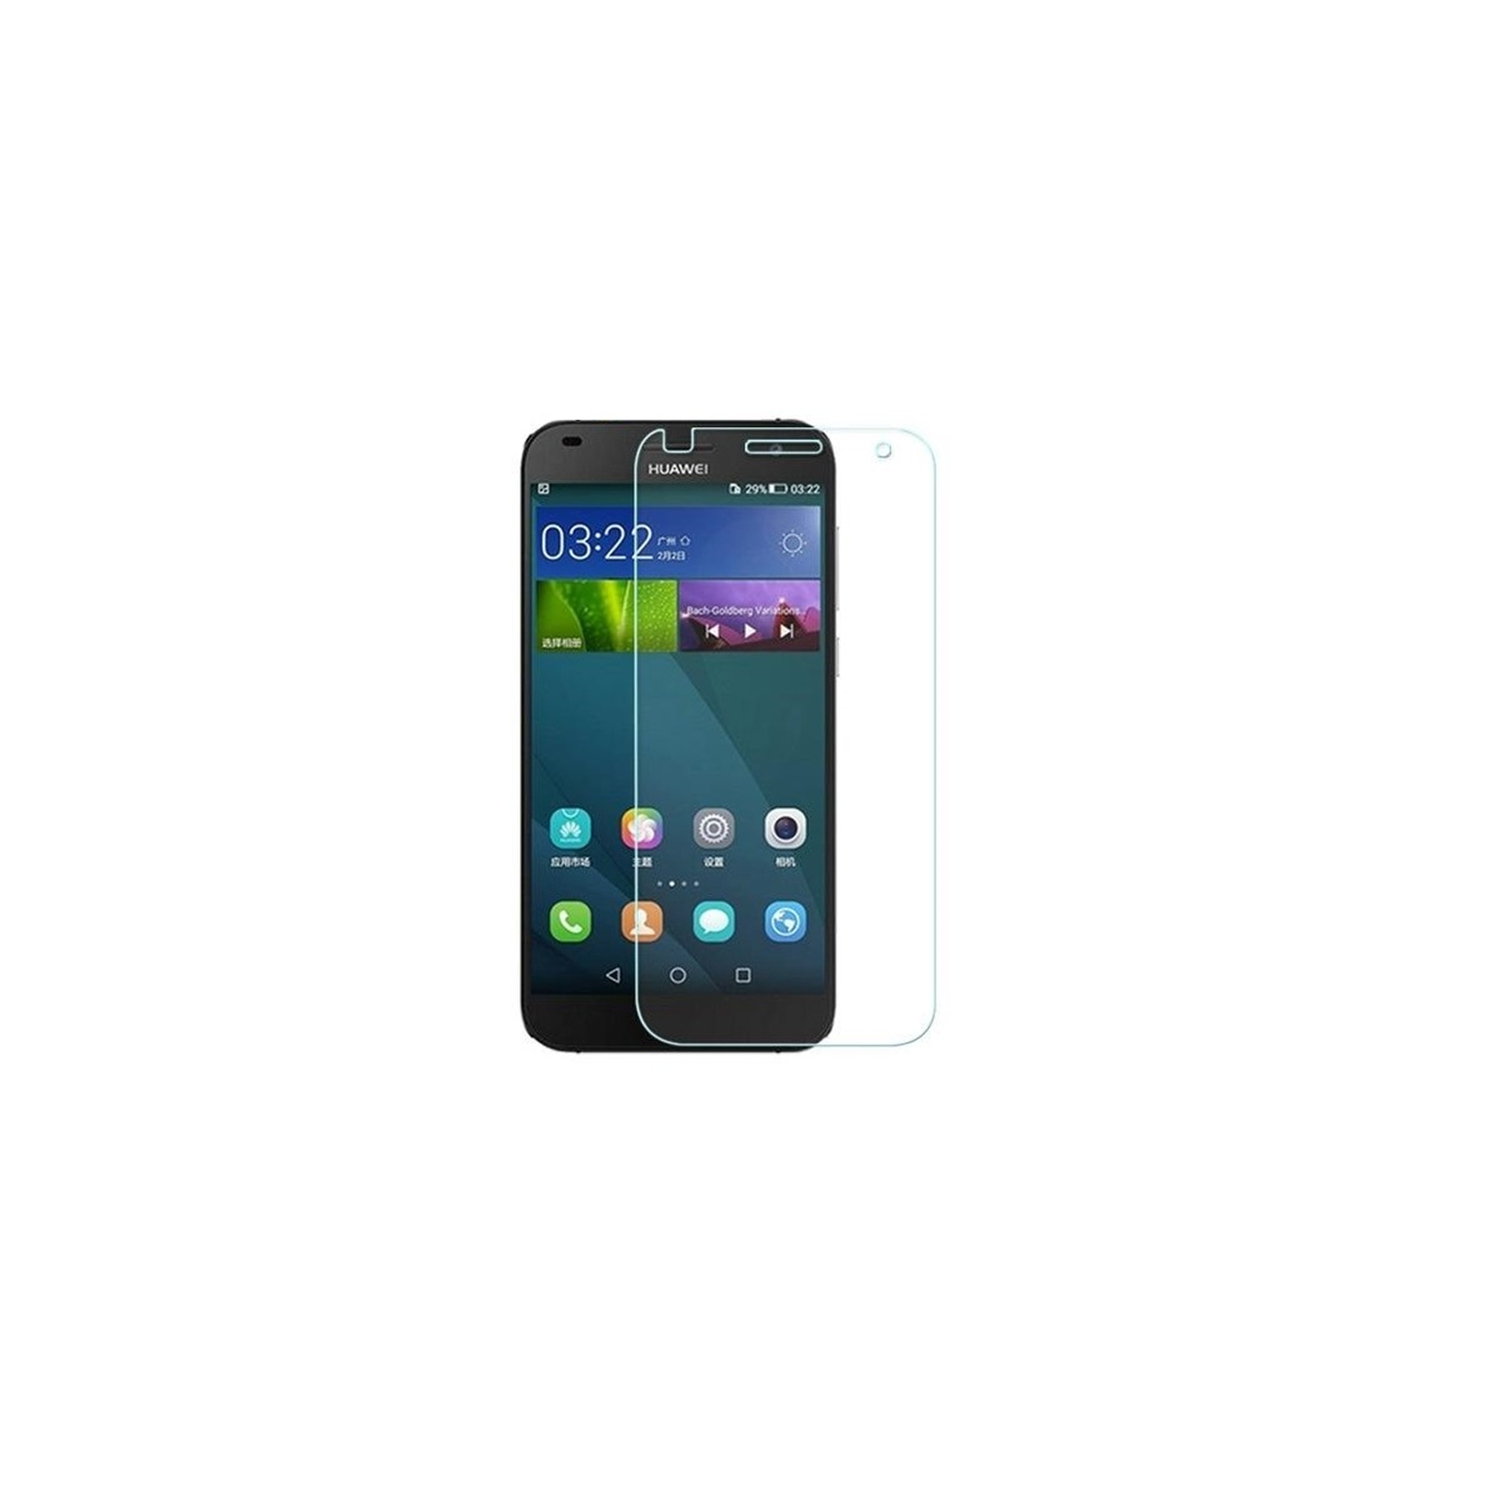 【2 Packs】 CSmart Premium Tempered Glass Screen Protector for Huawei G7, Case Friendly & Bubble Free